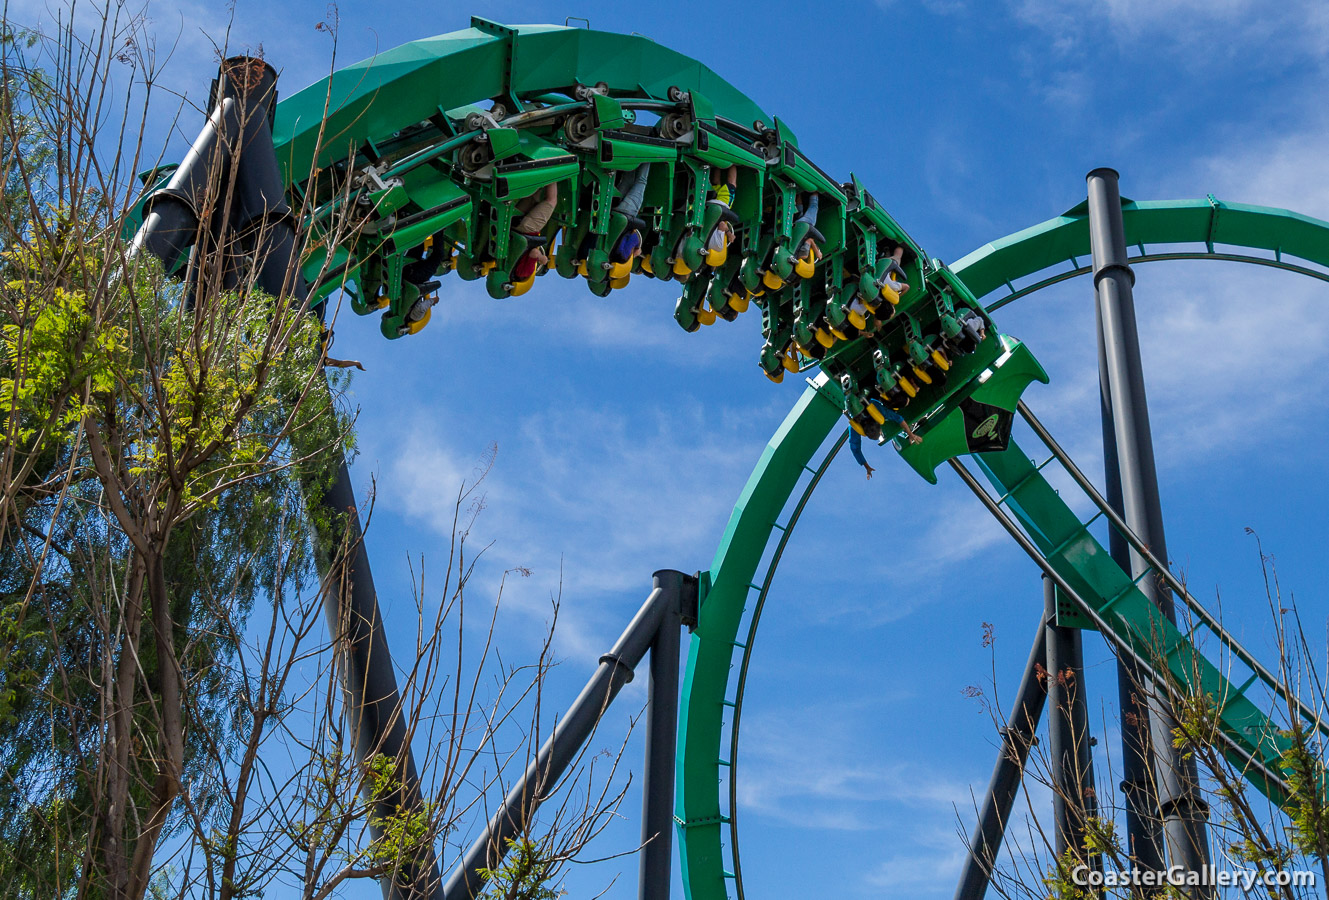 Stand-Up Coasters built by TOGO and Intamin AG